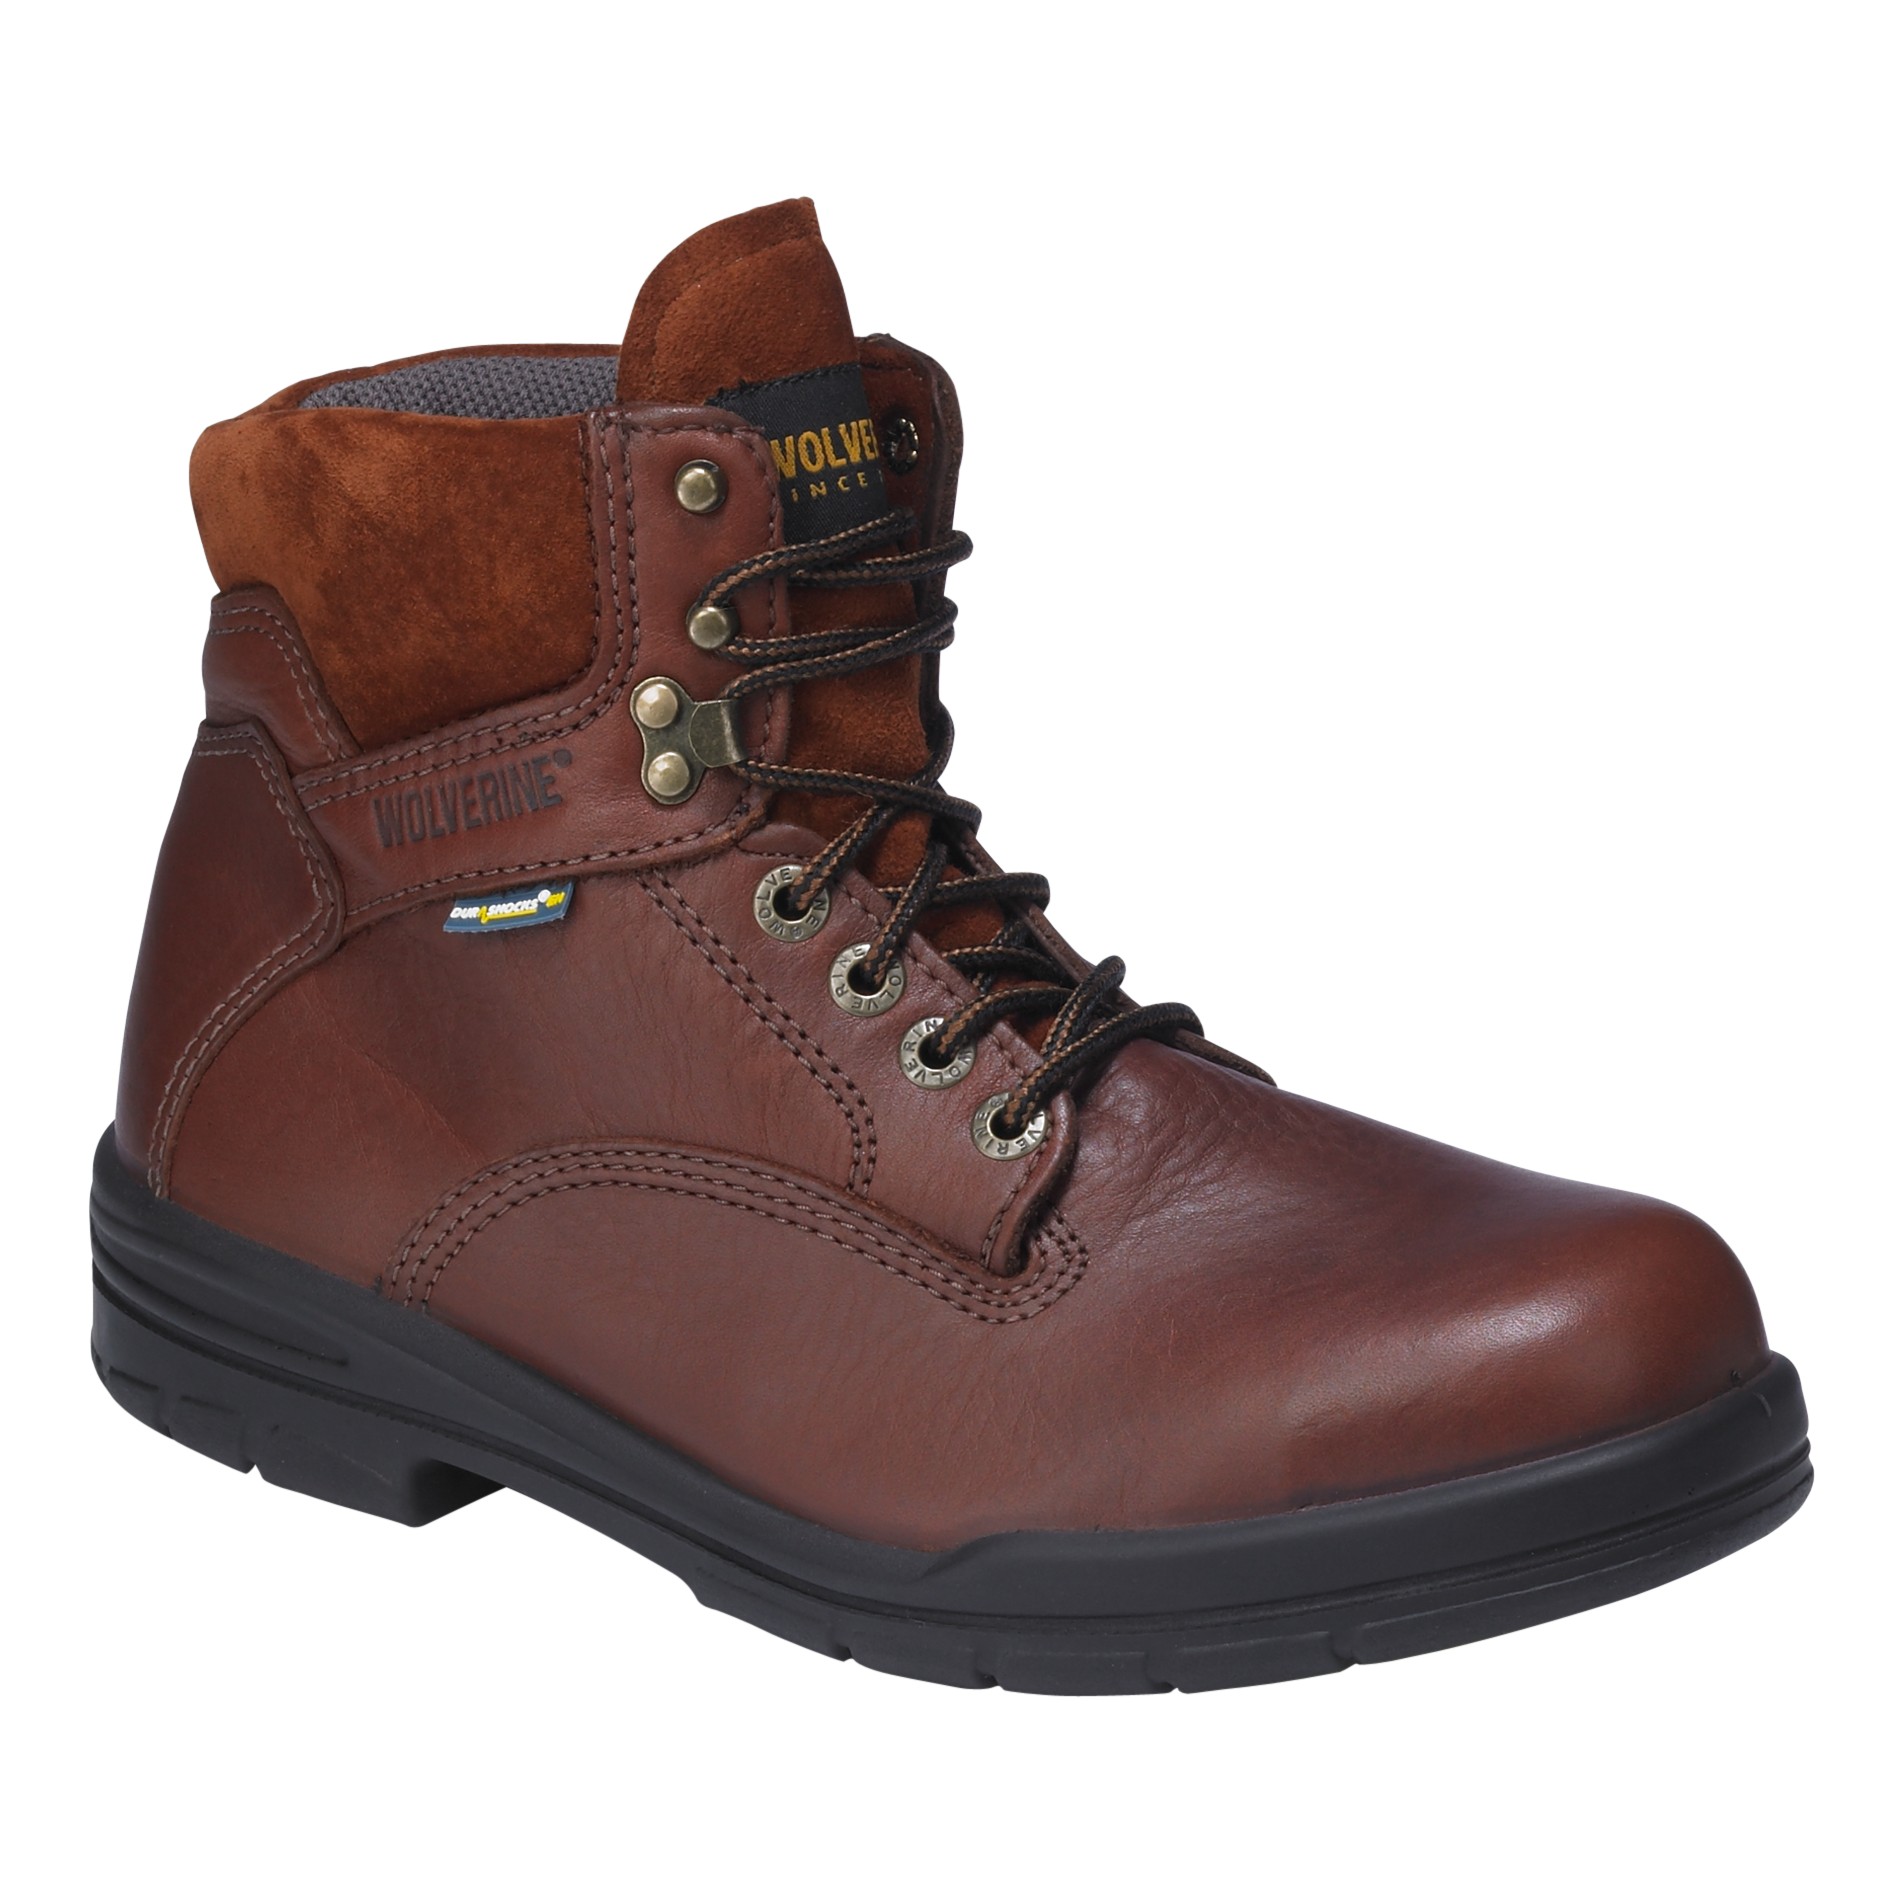 Work Boots For Men On Sale F9dqaXoW